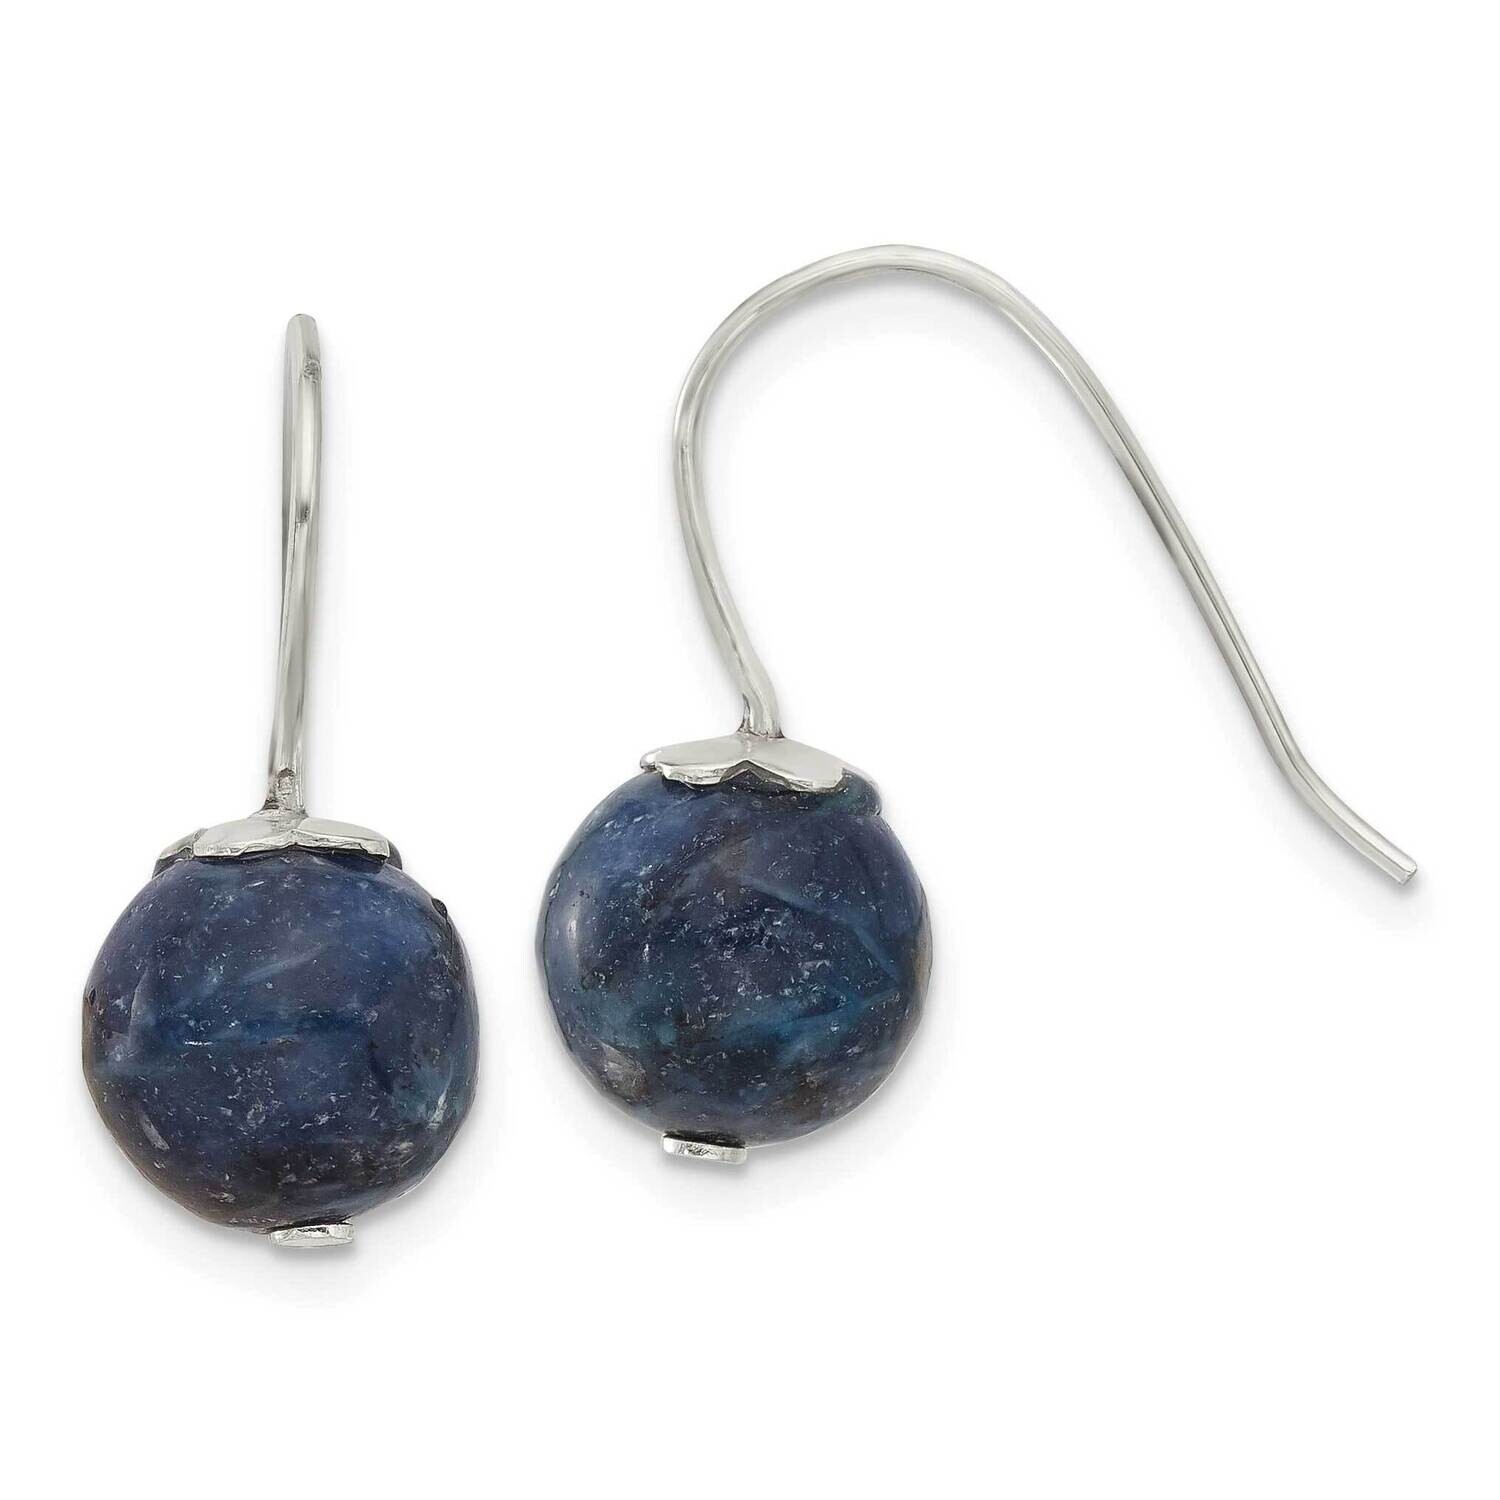 10mm Round Lapis Dangle Earrings Sterling Silver Polished QE17377